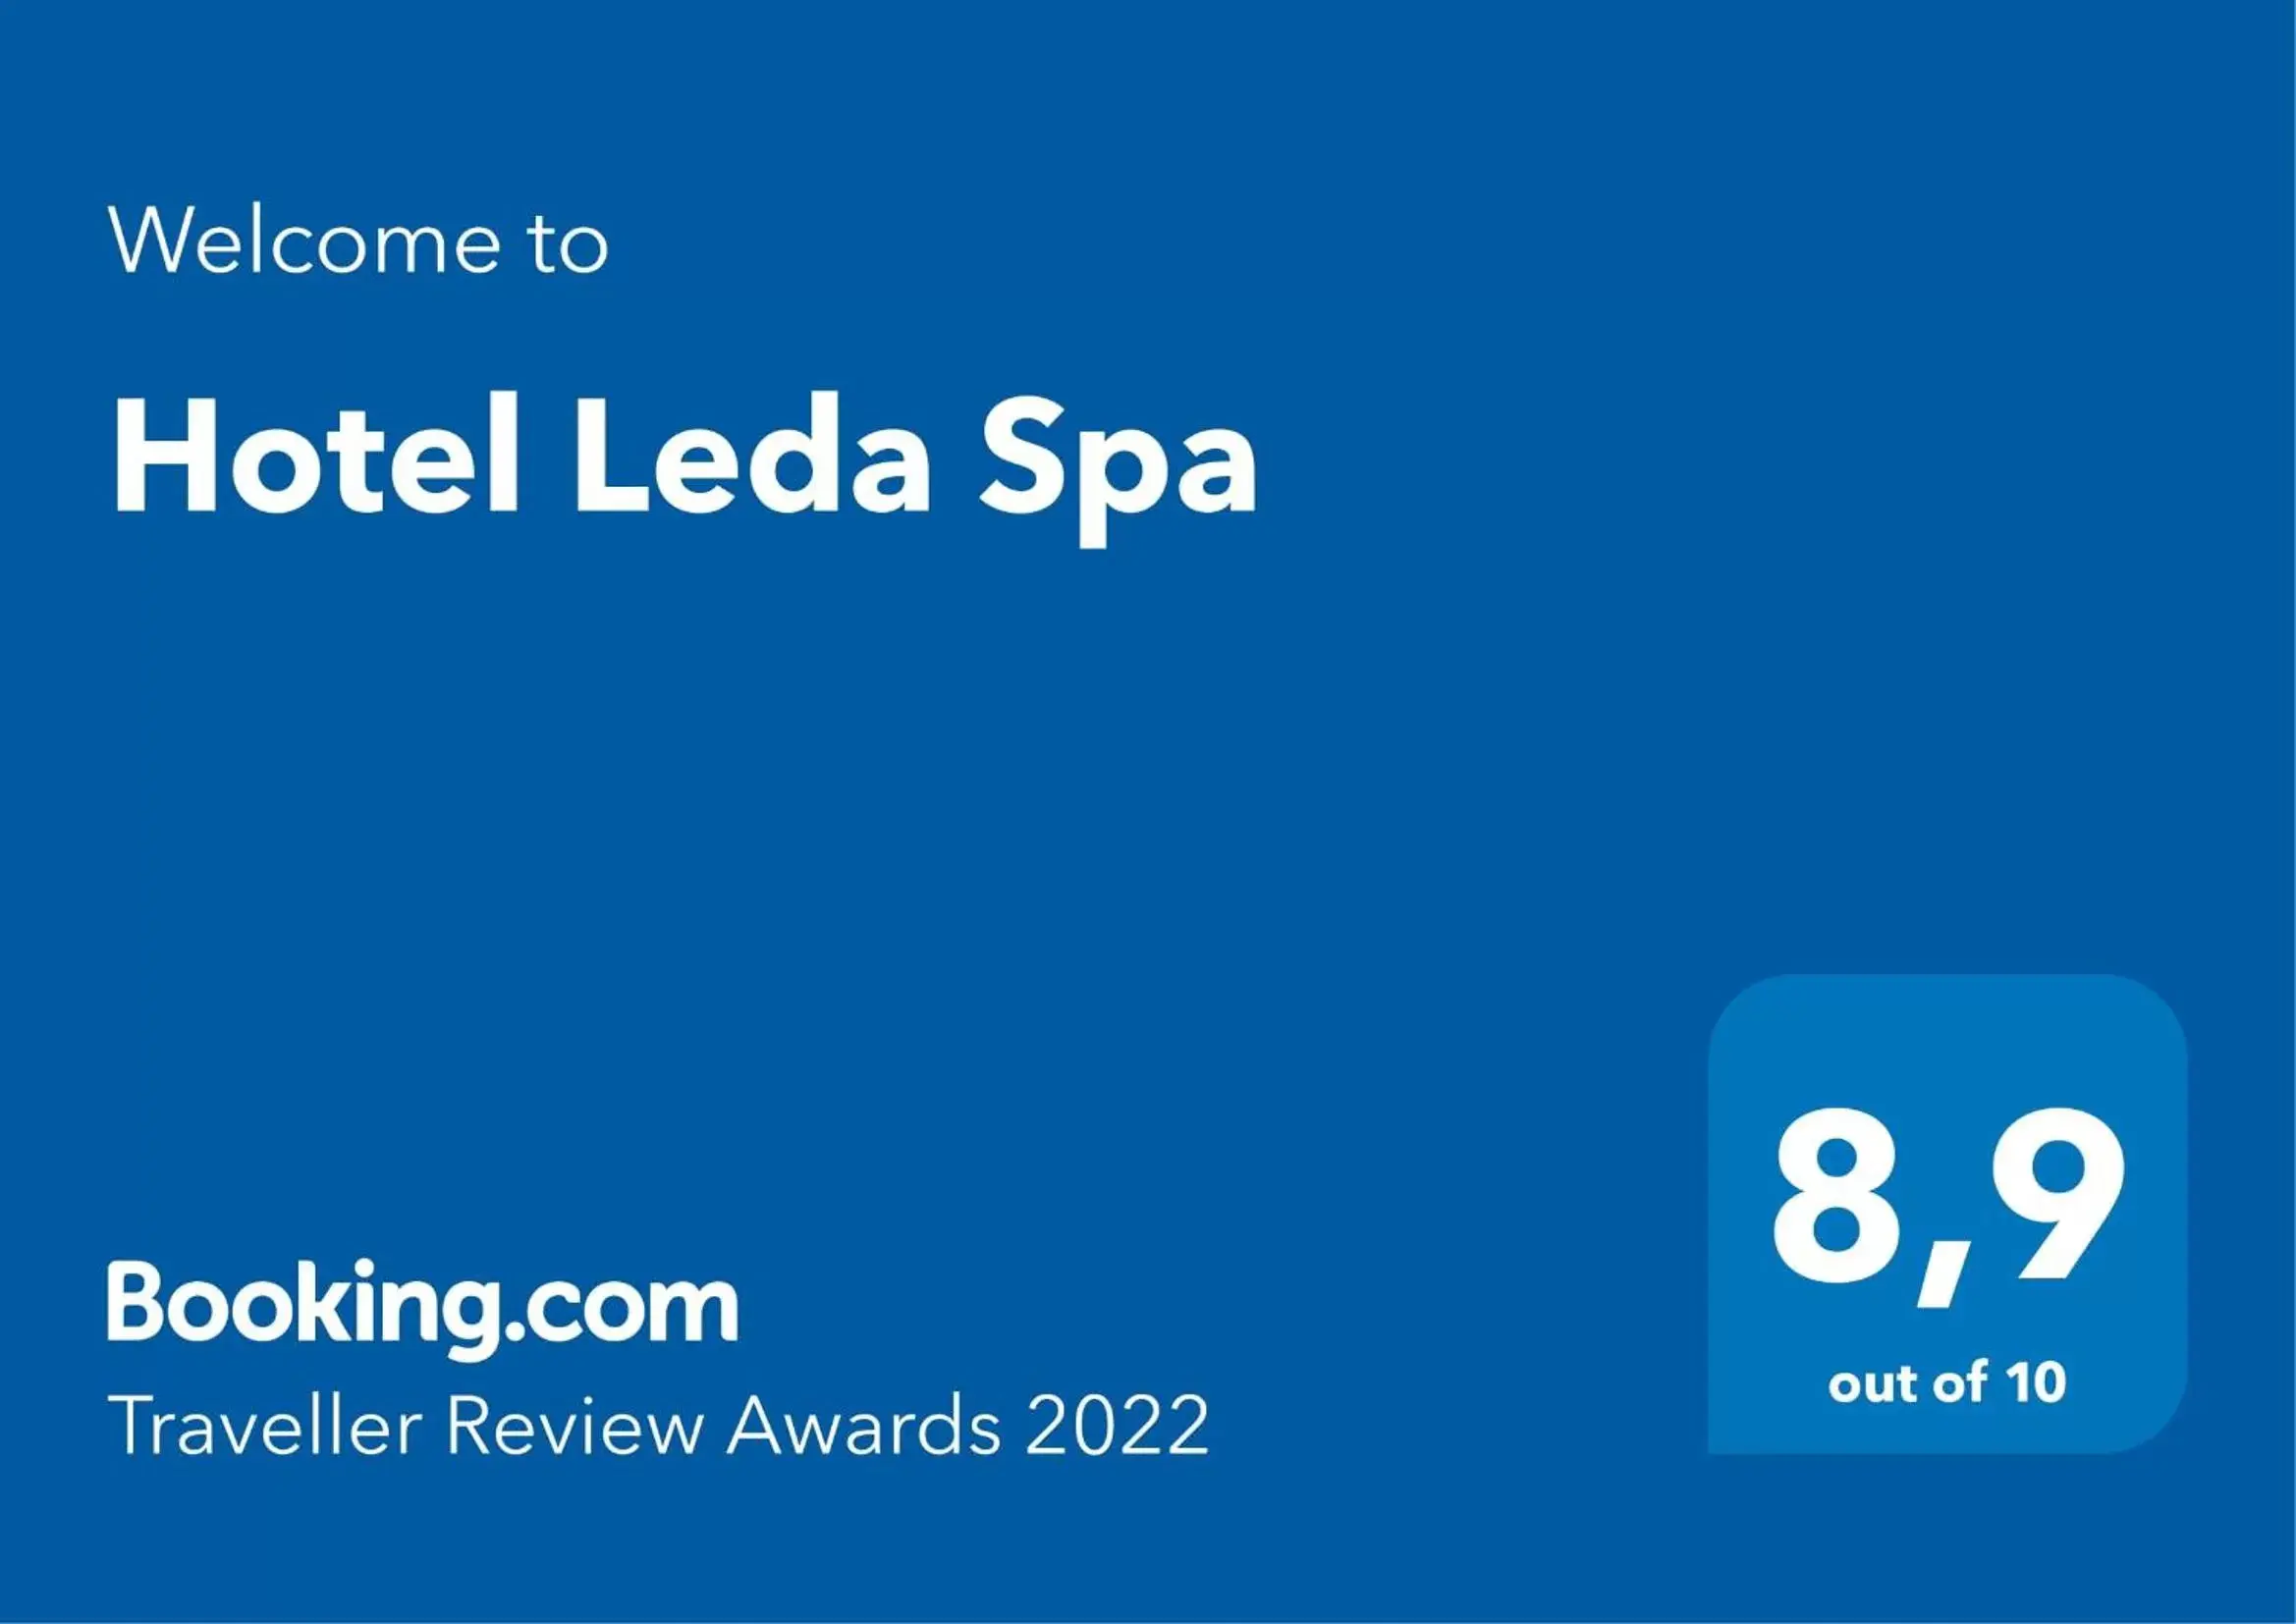 Certificate/Award, Logo/Certificate/Sign/Award in Hotel Leda Spa - Adults Only